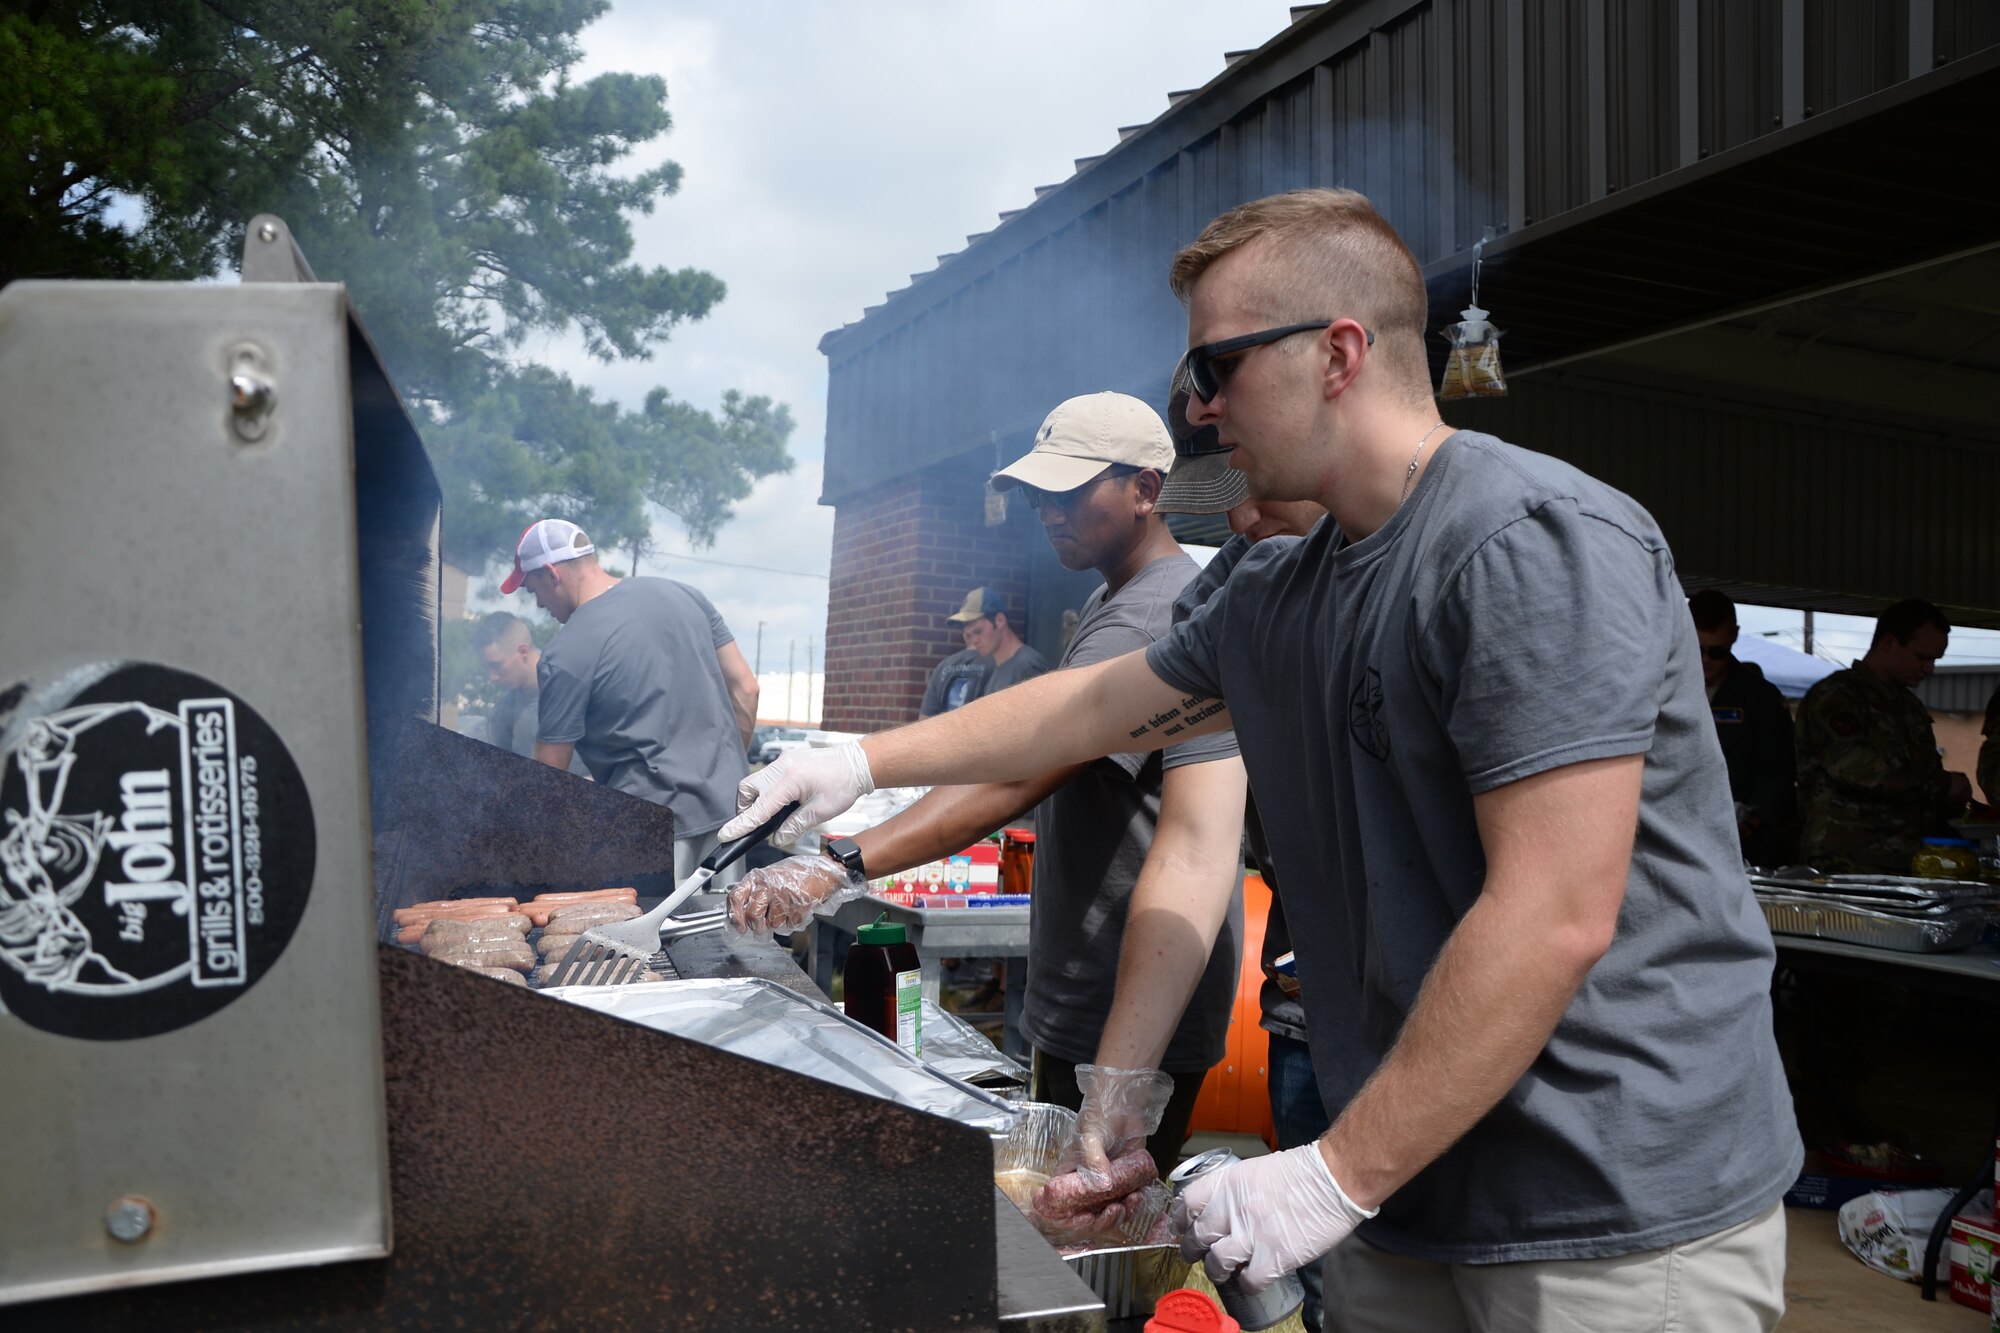 Members of the 14th Student Squadron grill burgers and brats during a barbeque Aug. 22, 2019, on Columbus Air Force Base, Mississippi. The barbeque was part of a Tactical Pause geared toward building resiliency amongst Airmen. (U.S. Air Force photo by Senior Airman Beaux Hebert)